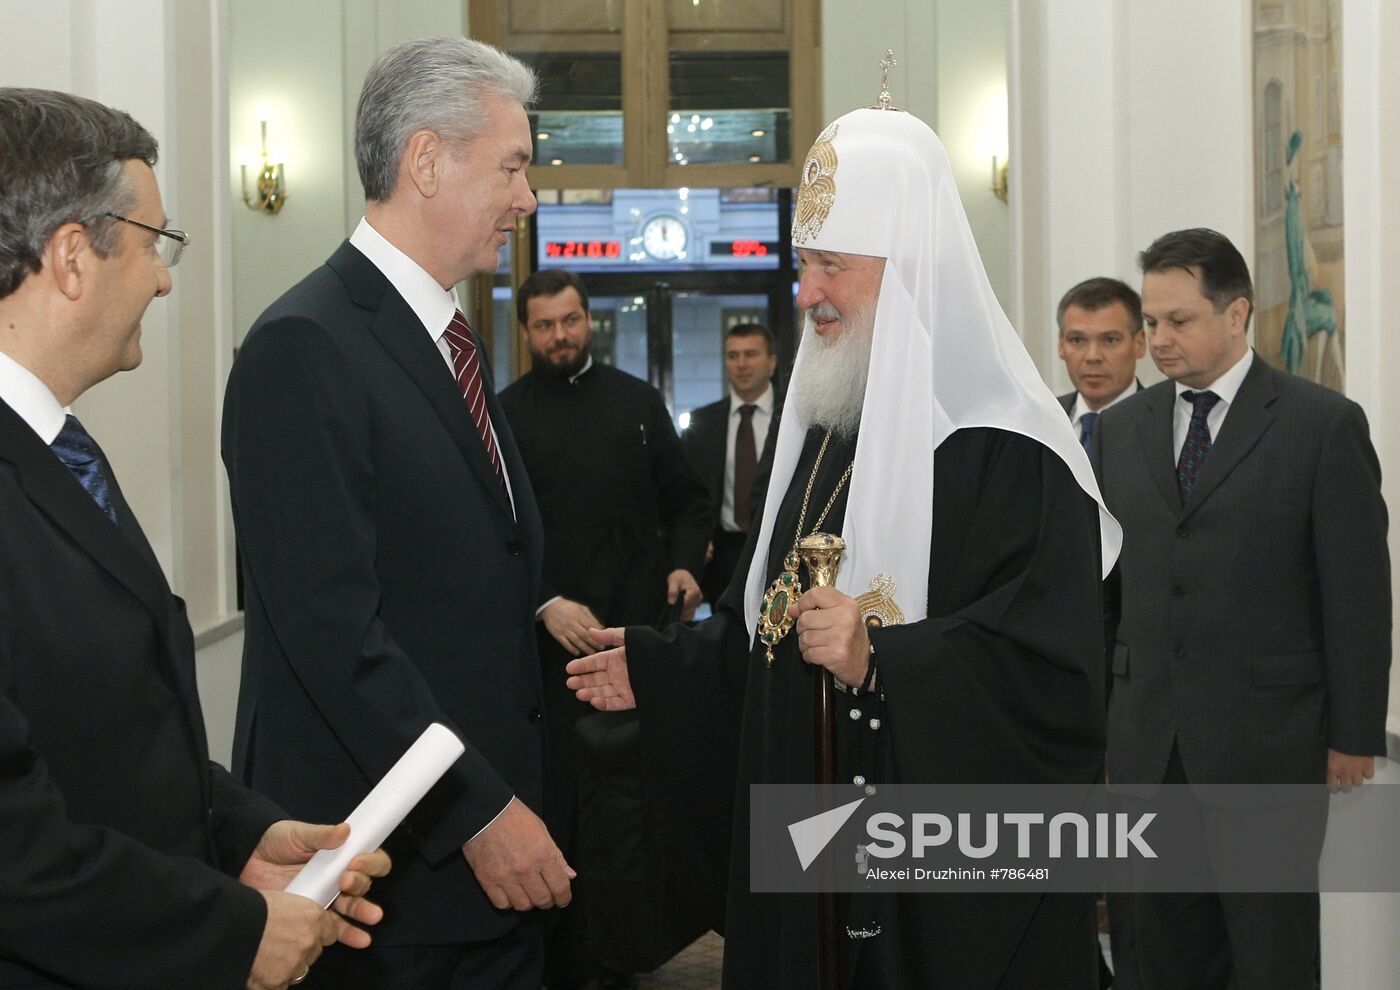 Sergei Sobyanin and Patriarch Kirill of Moscow and All Russia